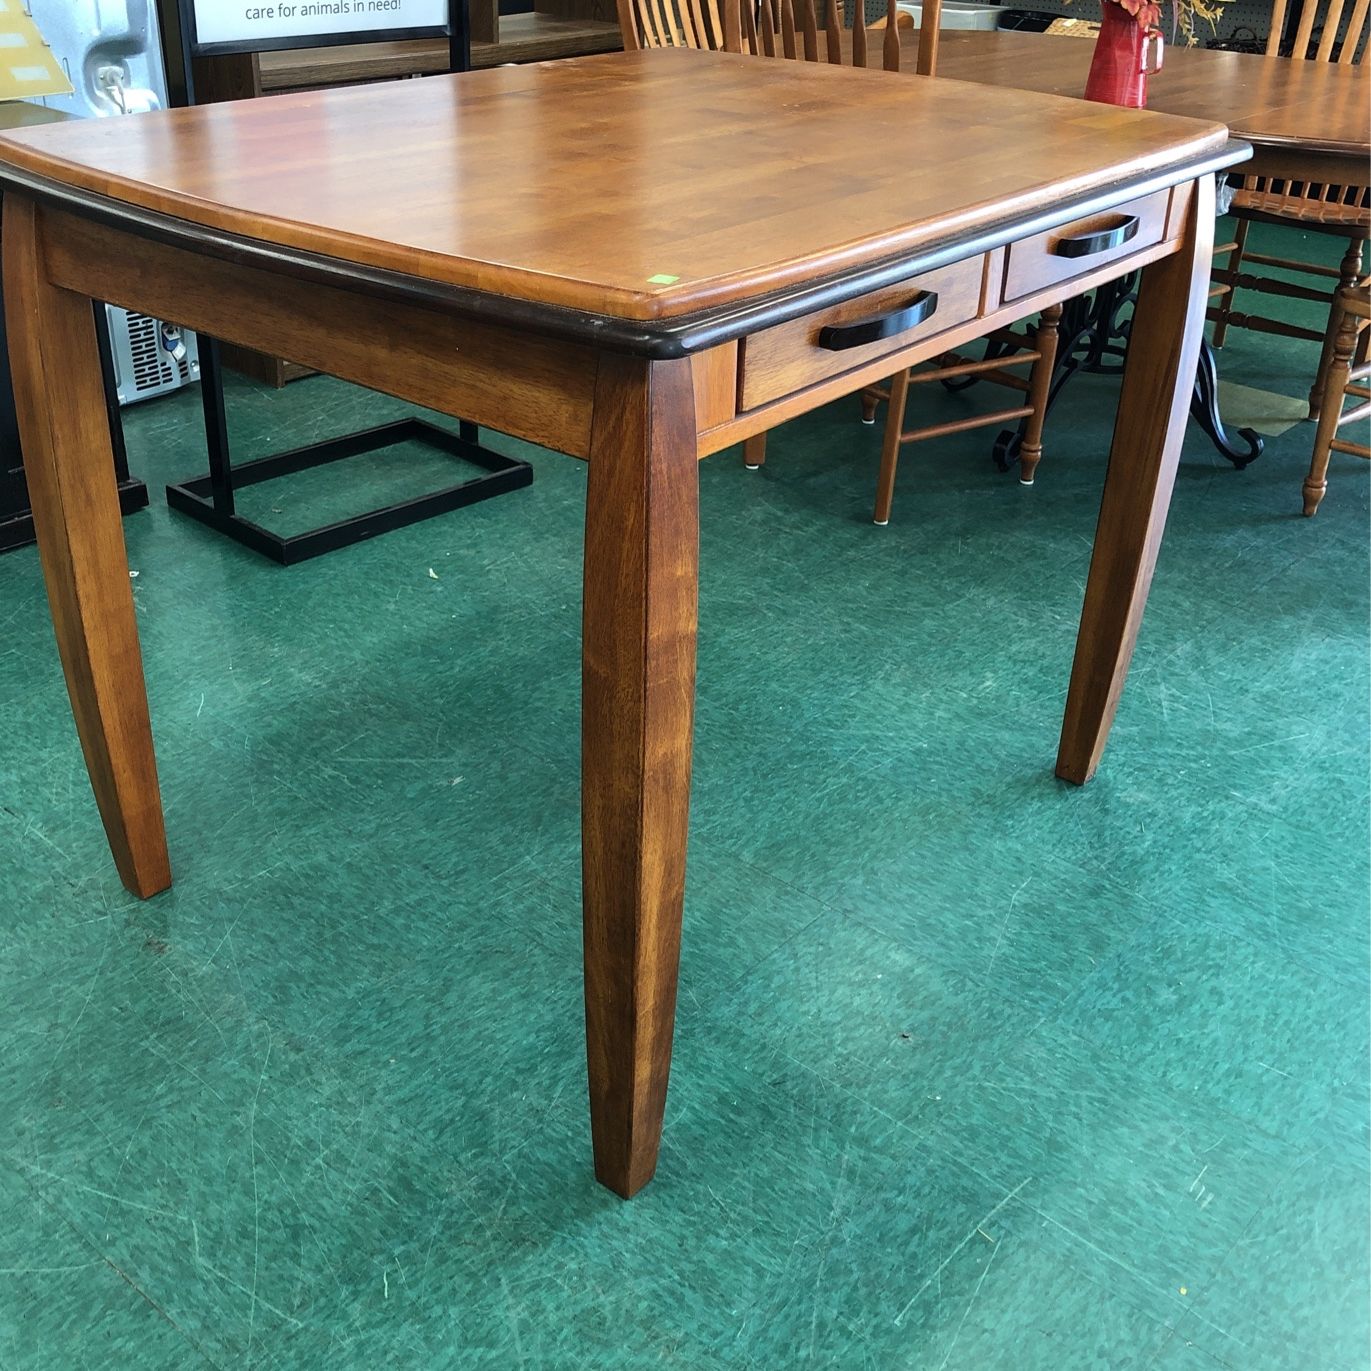 High Top Dining Room Table With Drawers For Storage